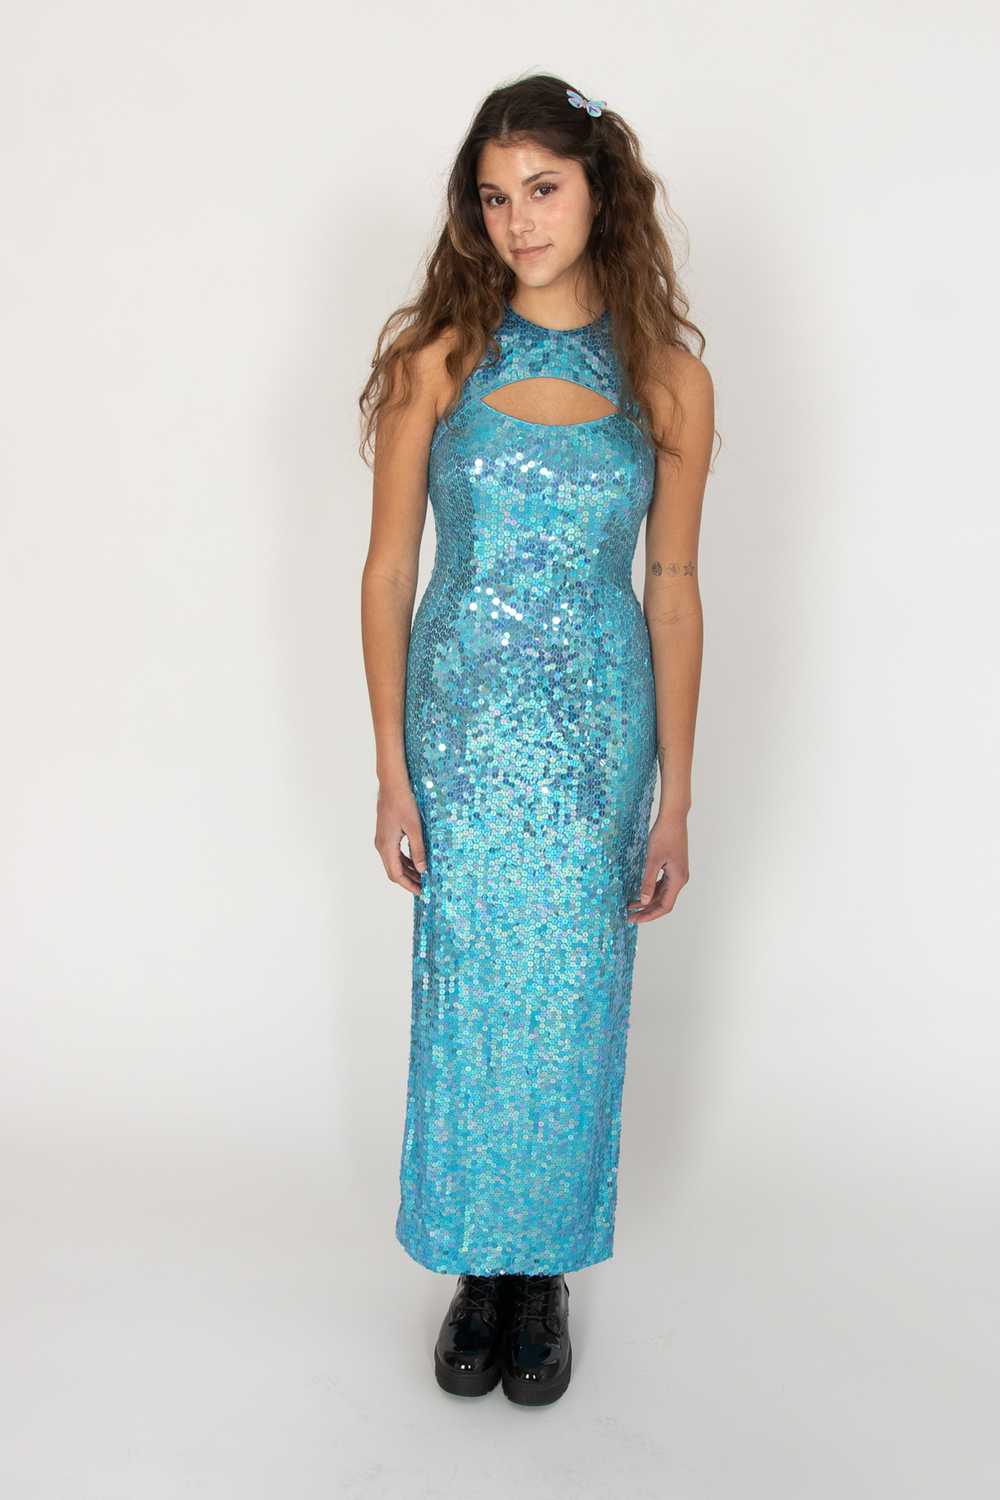 Vintage Adrianna Papell Blue Sequin Dress - image 1